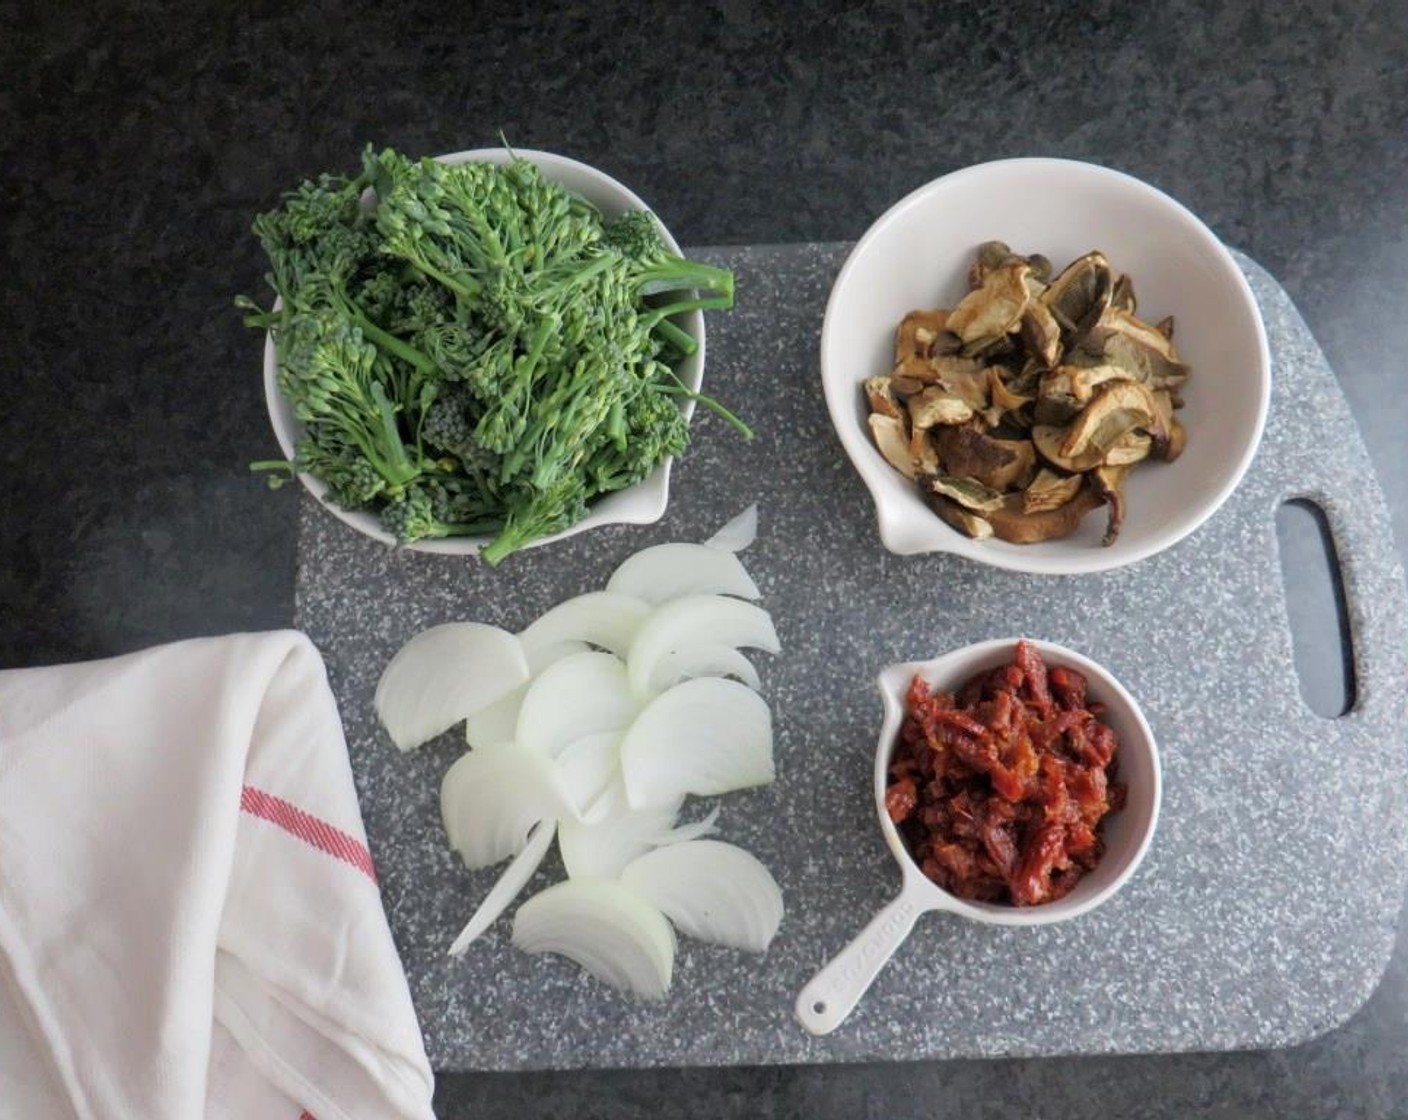 step 1 Reconstitute and roughly chop the Dried Porcini Mushroom (1 cup). Drain and thinly slice the Sun-Dried Tomatoes in Olive Oil (1 cup). Trim the root from the Onion (1/2) and slice lengthwise. Cut the Broccoli Florets (2 cups).